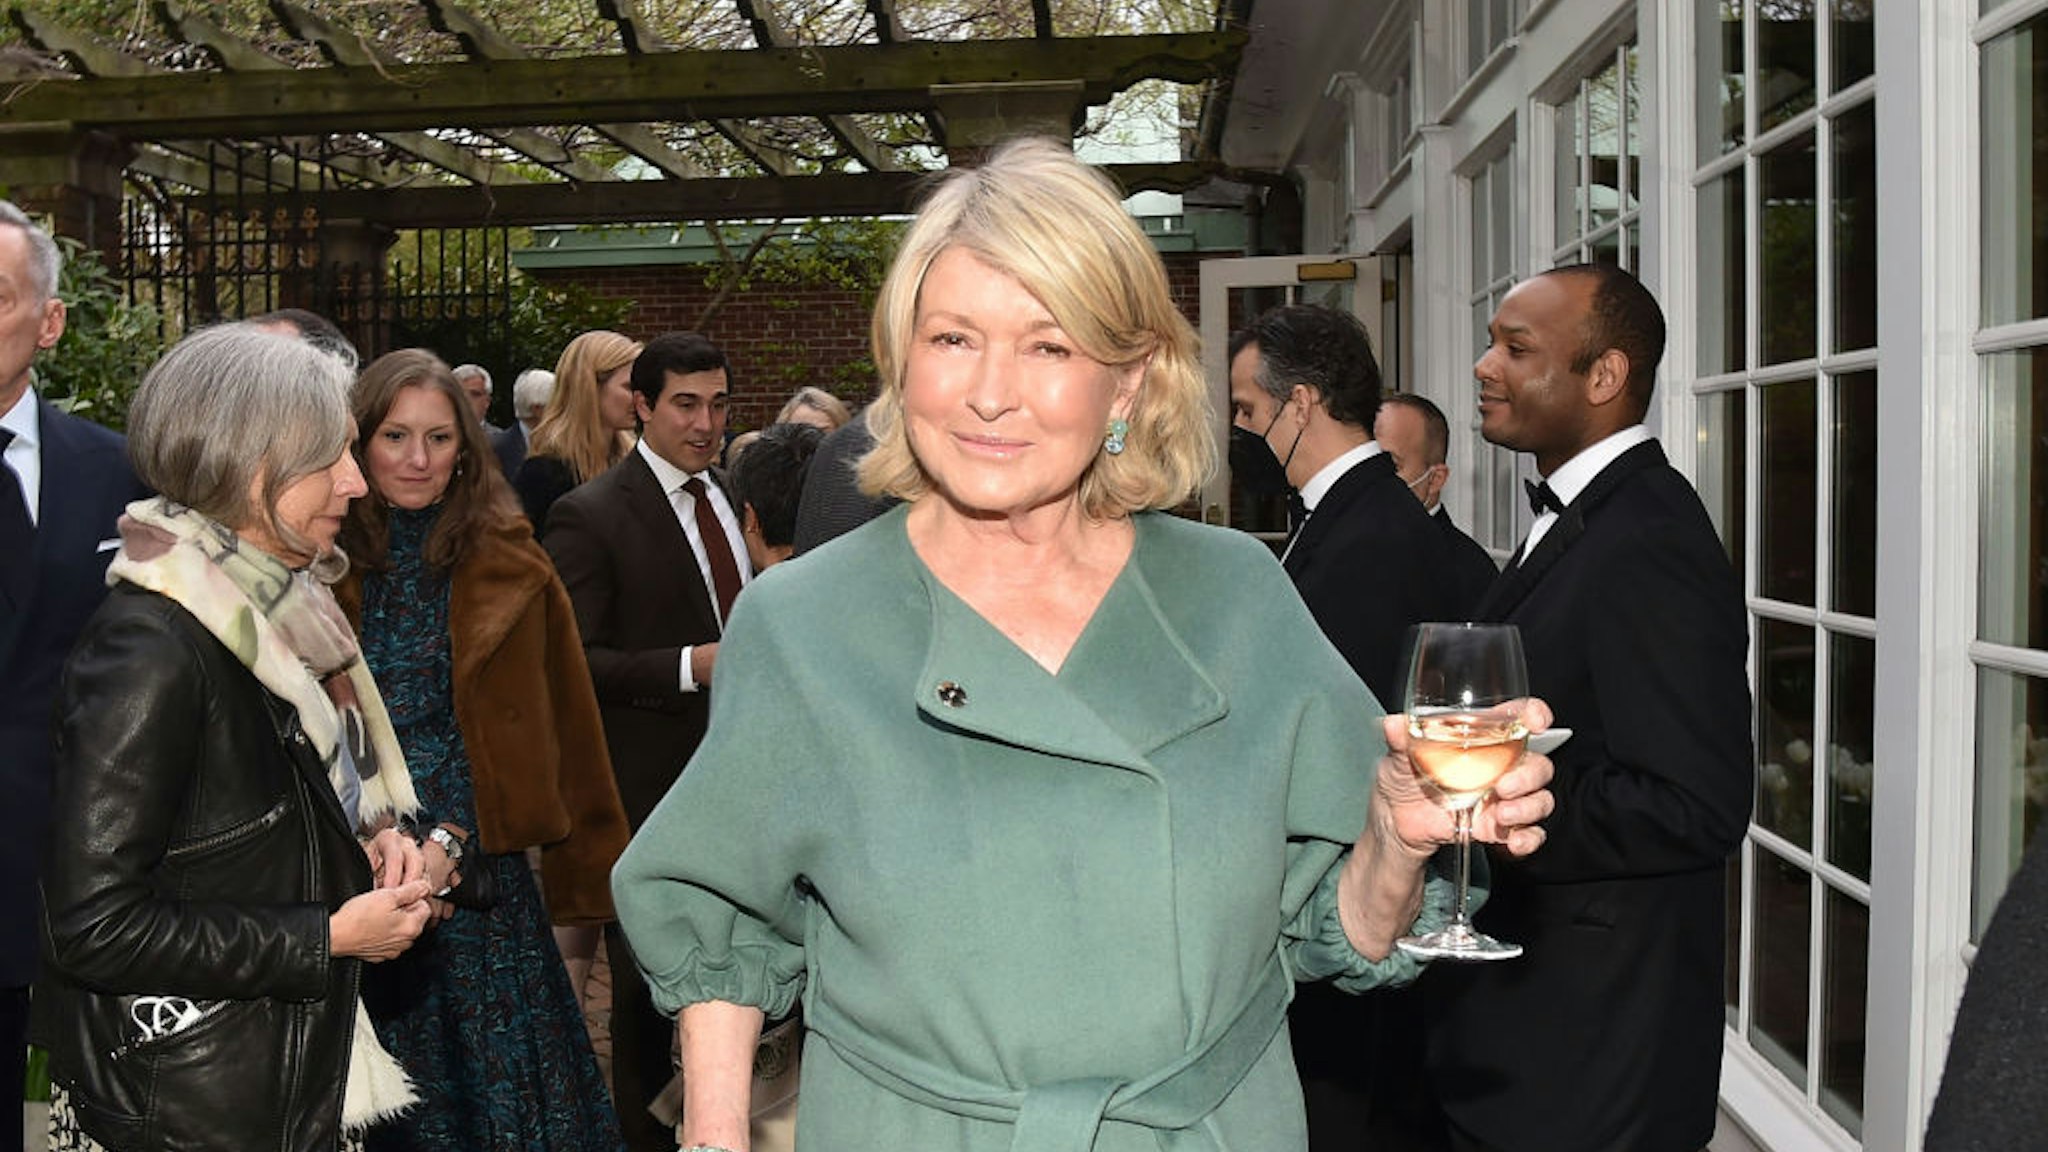 NEW YORK, NEW YORK - APRIL 25: Martha Stewart attends Olmsted Bicentennial Gala "Parks For All People" Presented By National Association For Olmsted Parks At Central Park at The Loeb Boathouse on April 25, 2022 in New York City. (Photo by Patrick McMullan/PMC via Getty Images)